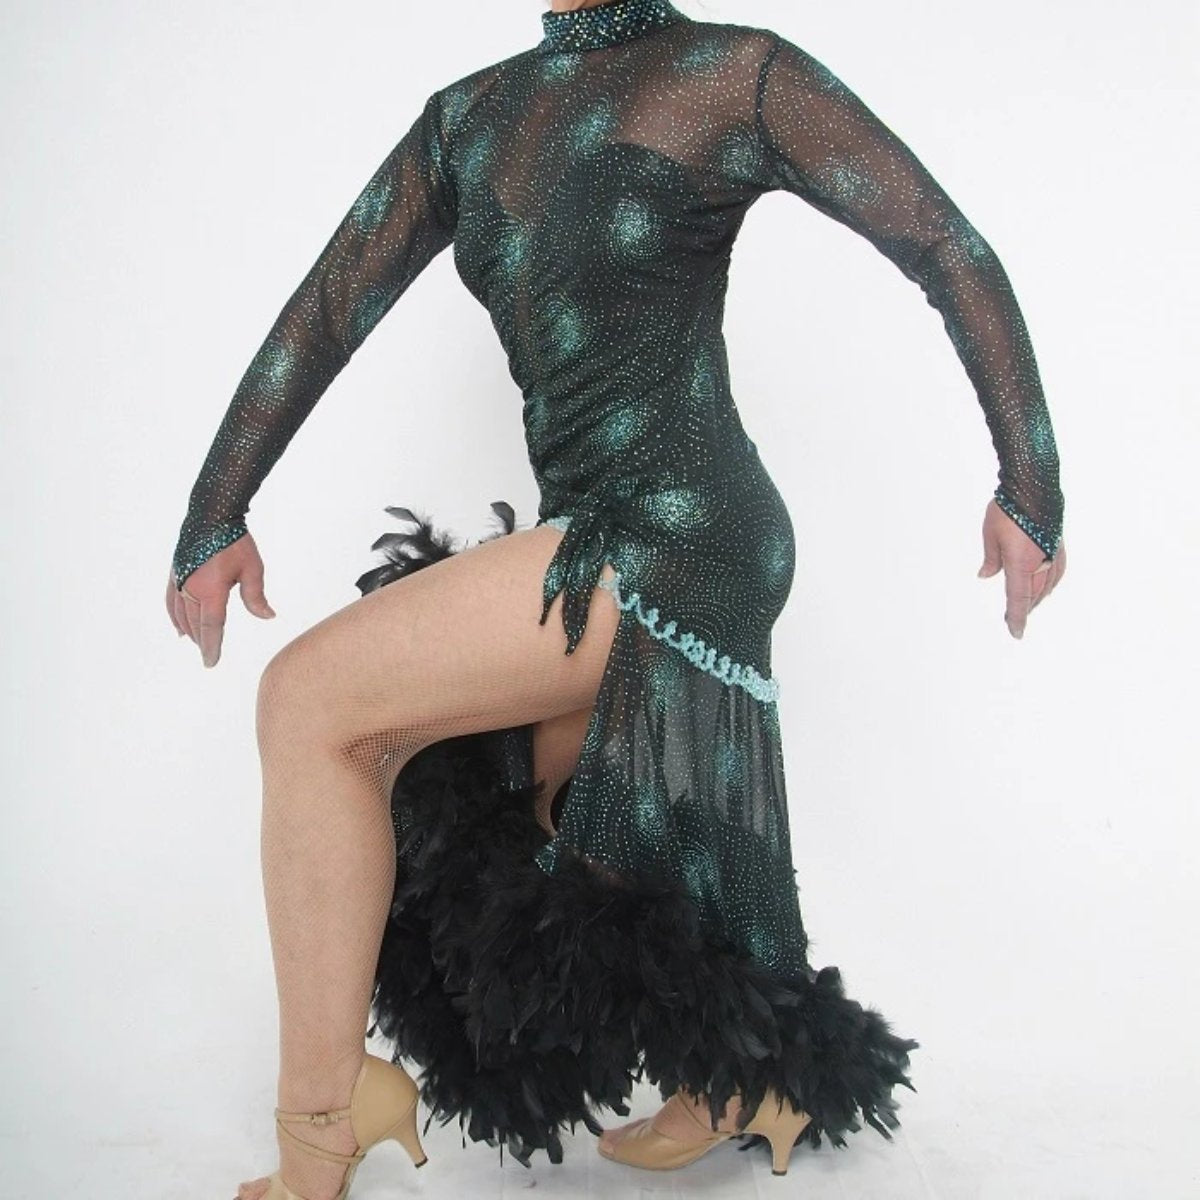 close side view of Elegant black Latin/rhythm dance dress was created in a black glitter sheer mesh with aqua glitter bursts over black lycra body suit, embellished with jet AB Swarovski stones, hand beading, plus chandelle feathers.